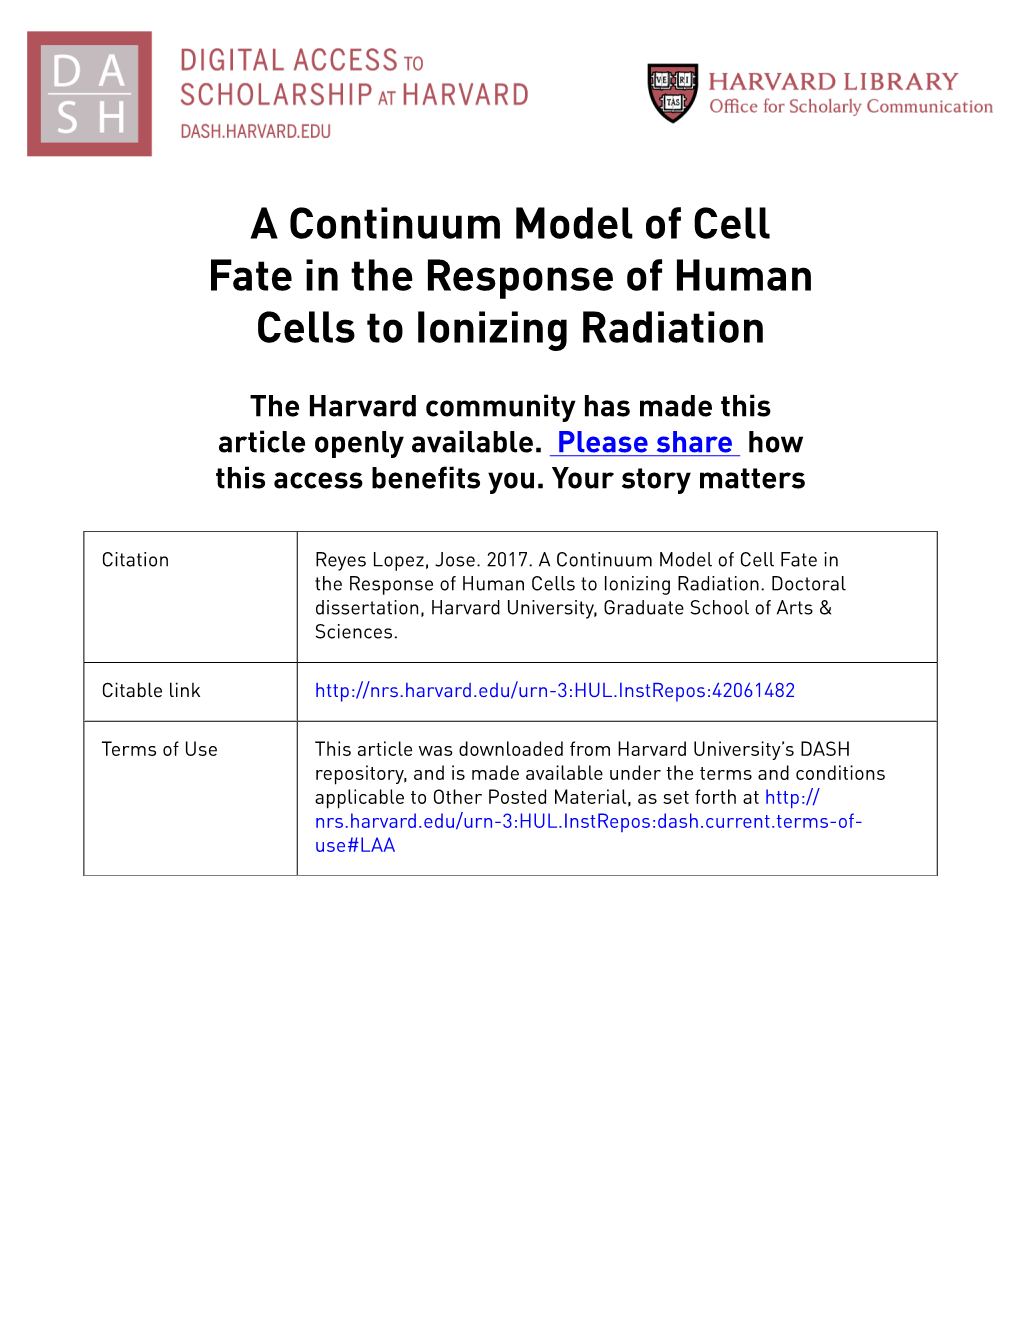 A Continuum Model of Cell Fate in the Response of Human Cells to Ionizing Radiation